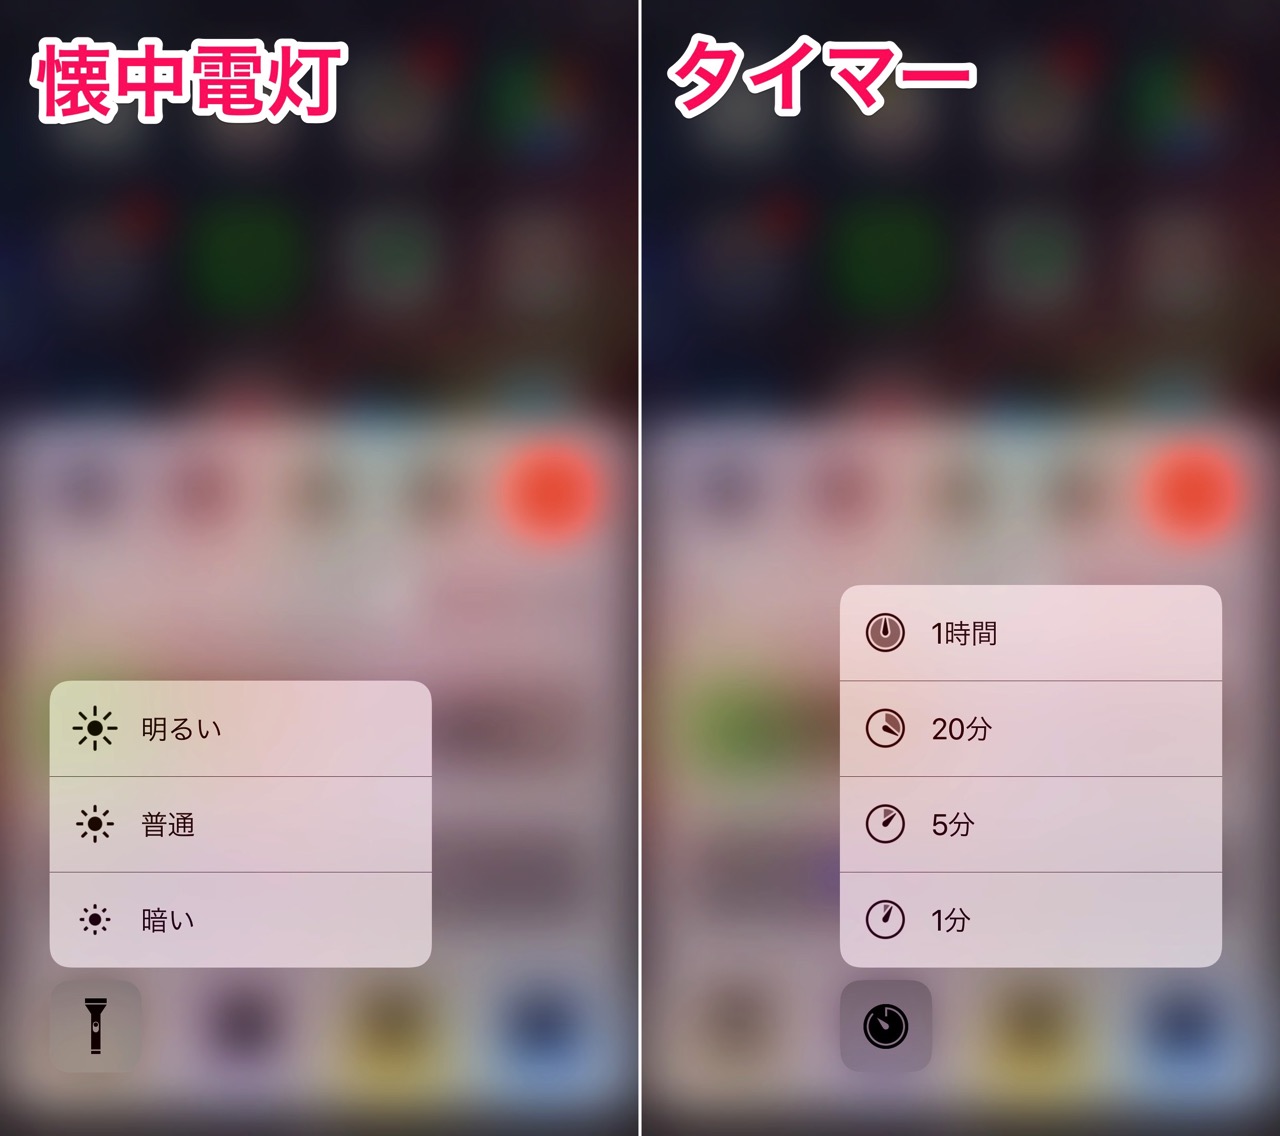 How to use control center for ios 10 3d touch 1